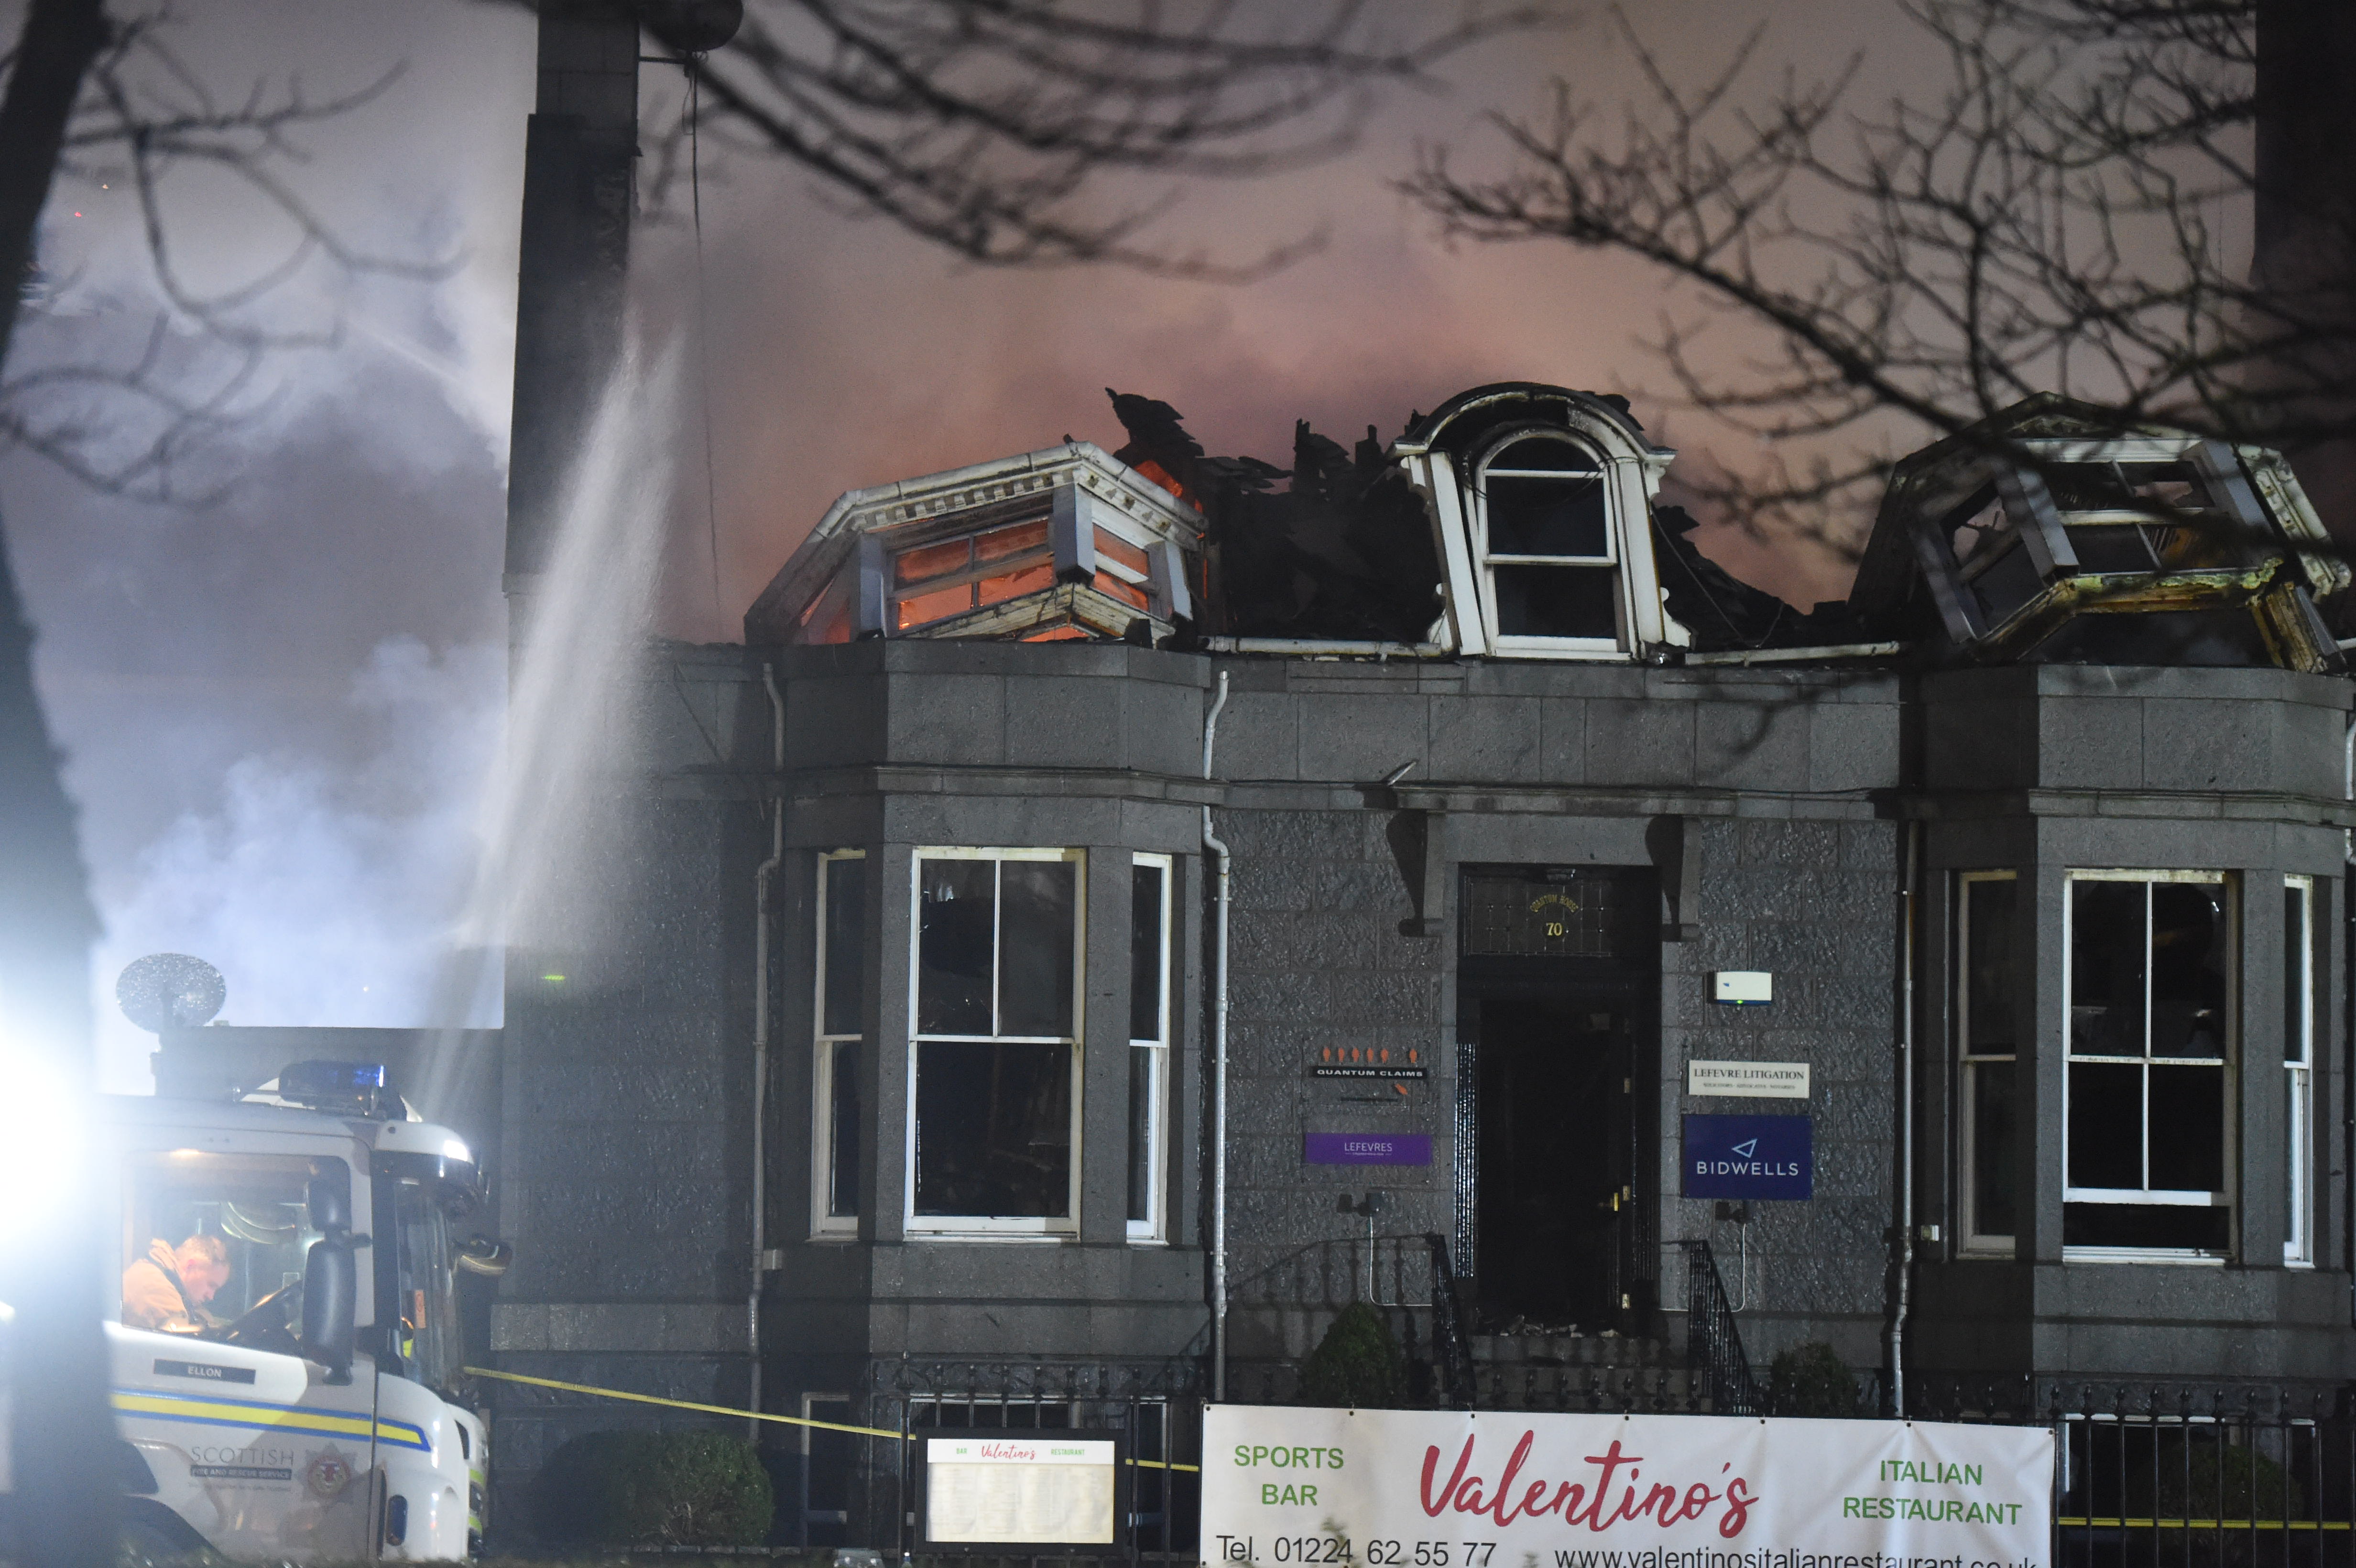 The destruction at Valentinos Italian Restaurant due to a fire.